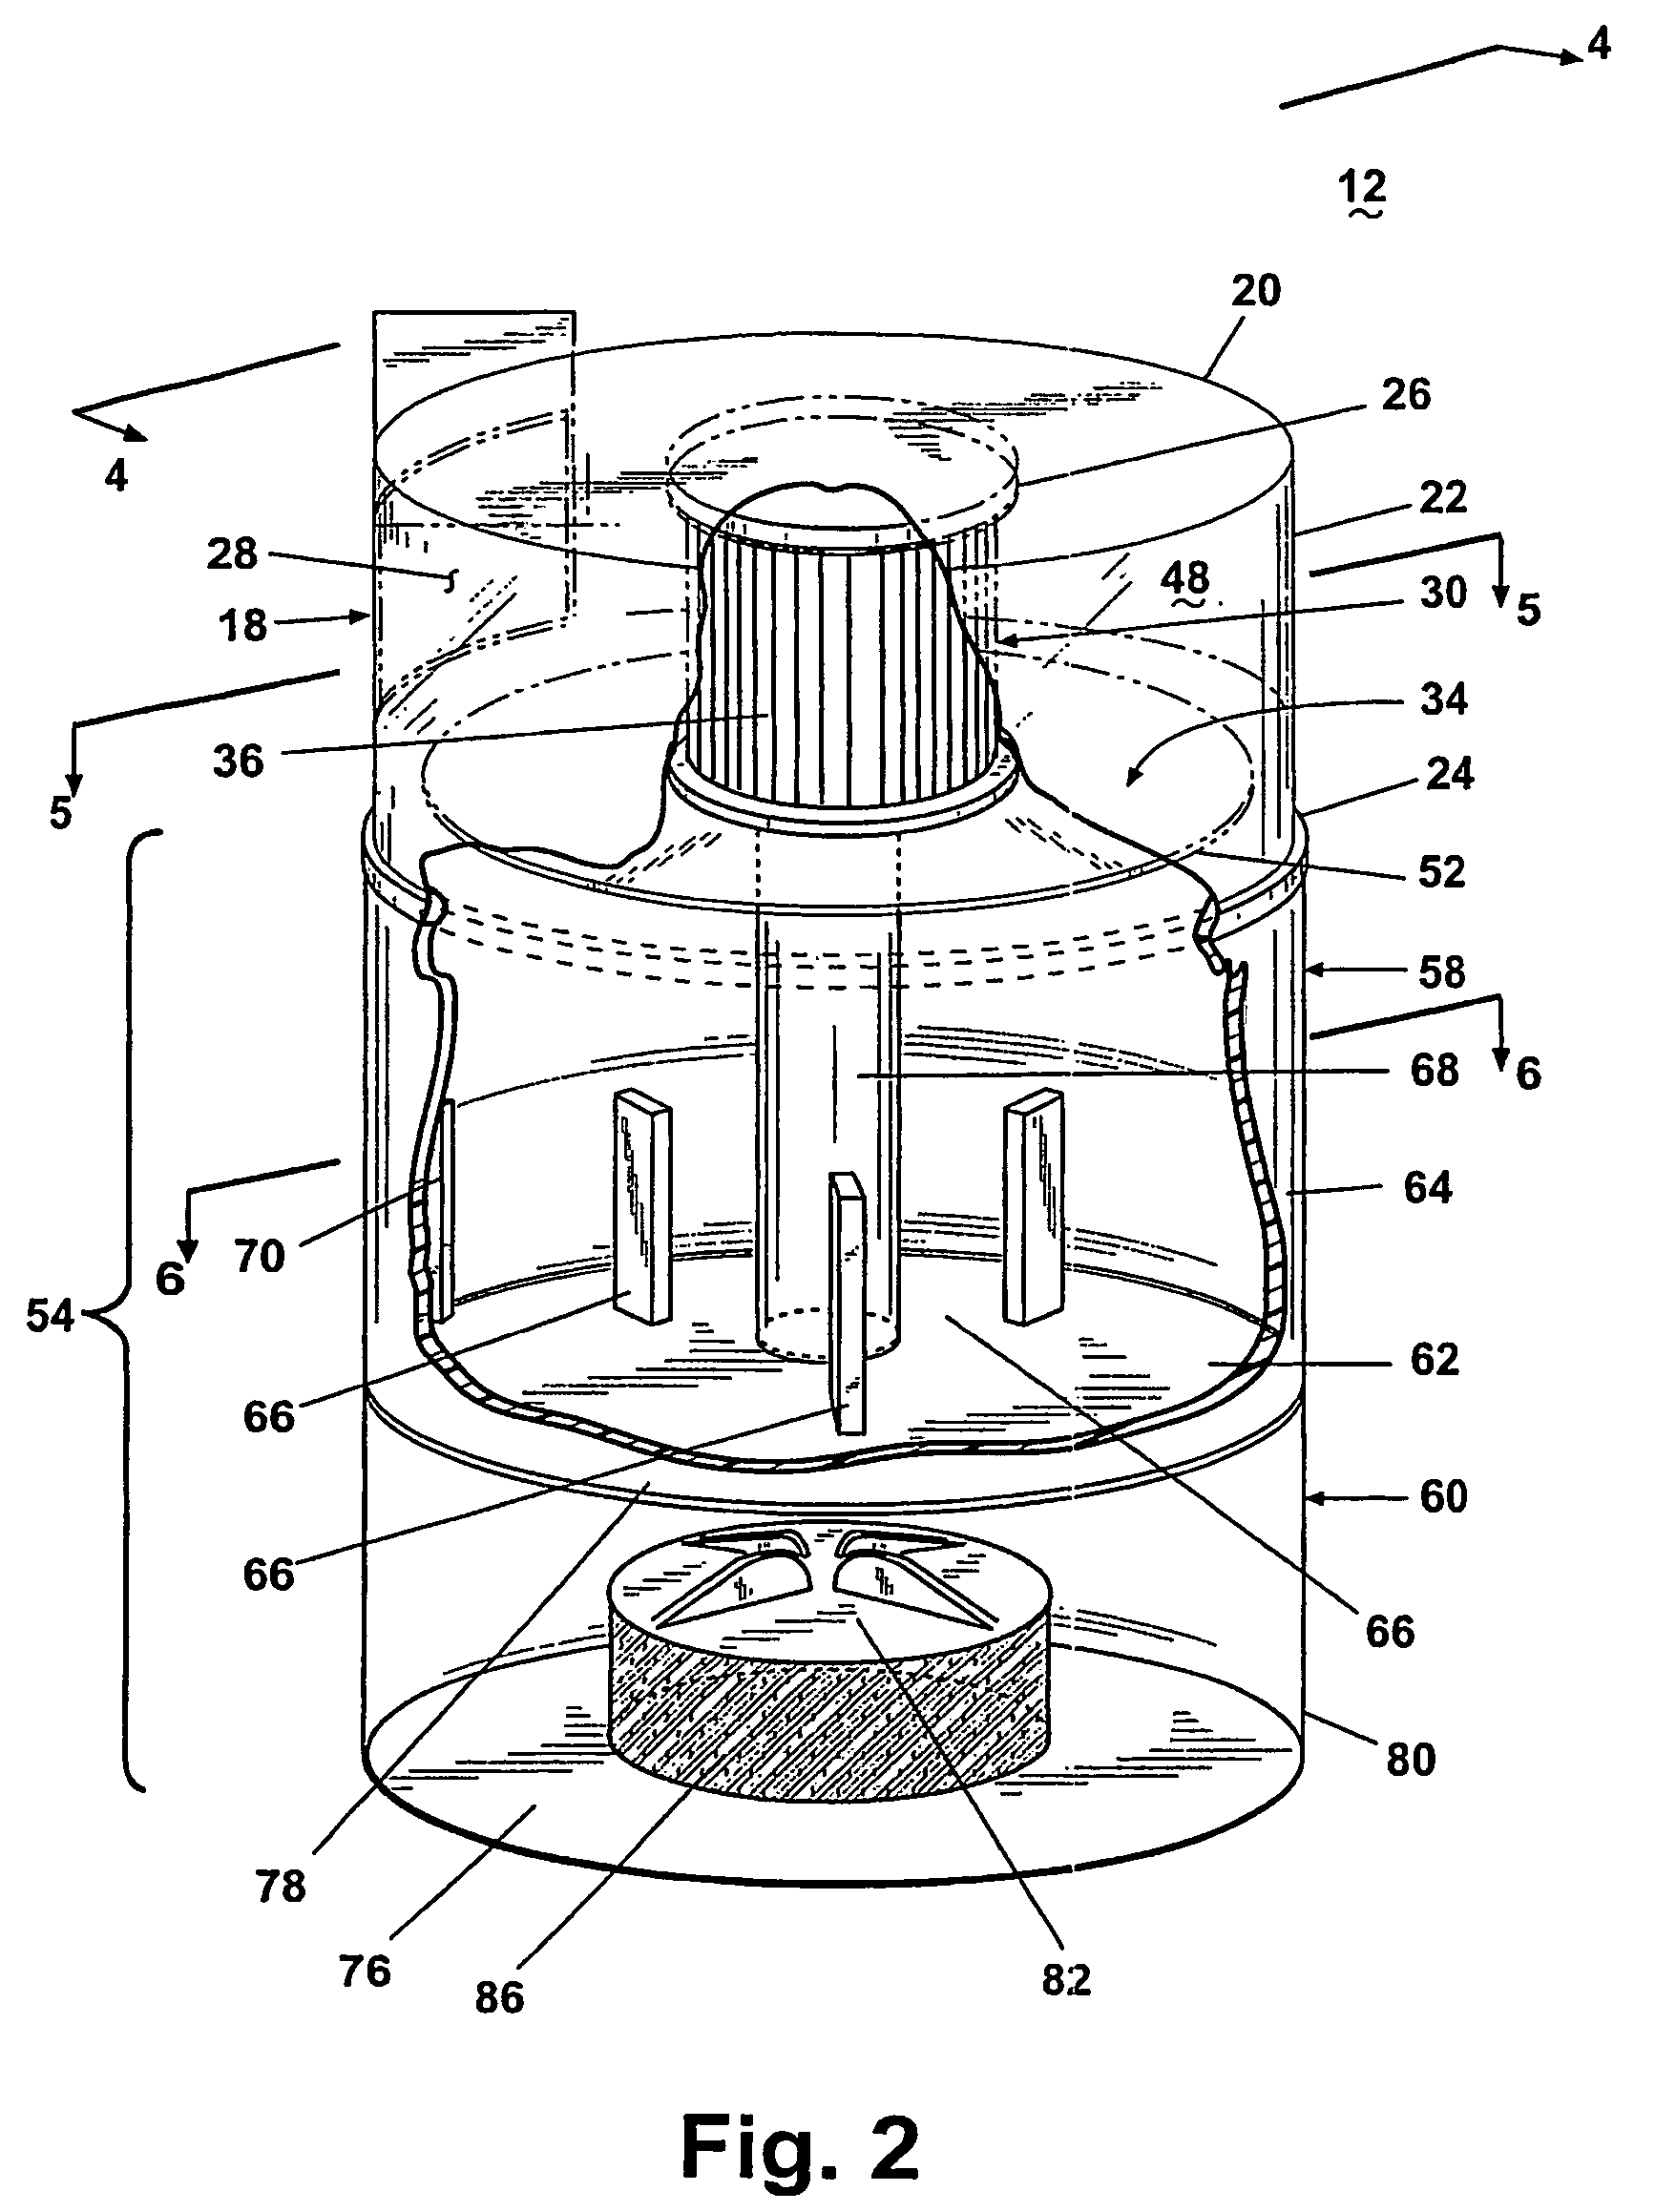 Vacuum cleaner with cyclonic dirt separation and bottom discharge dirt cup with filter